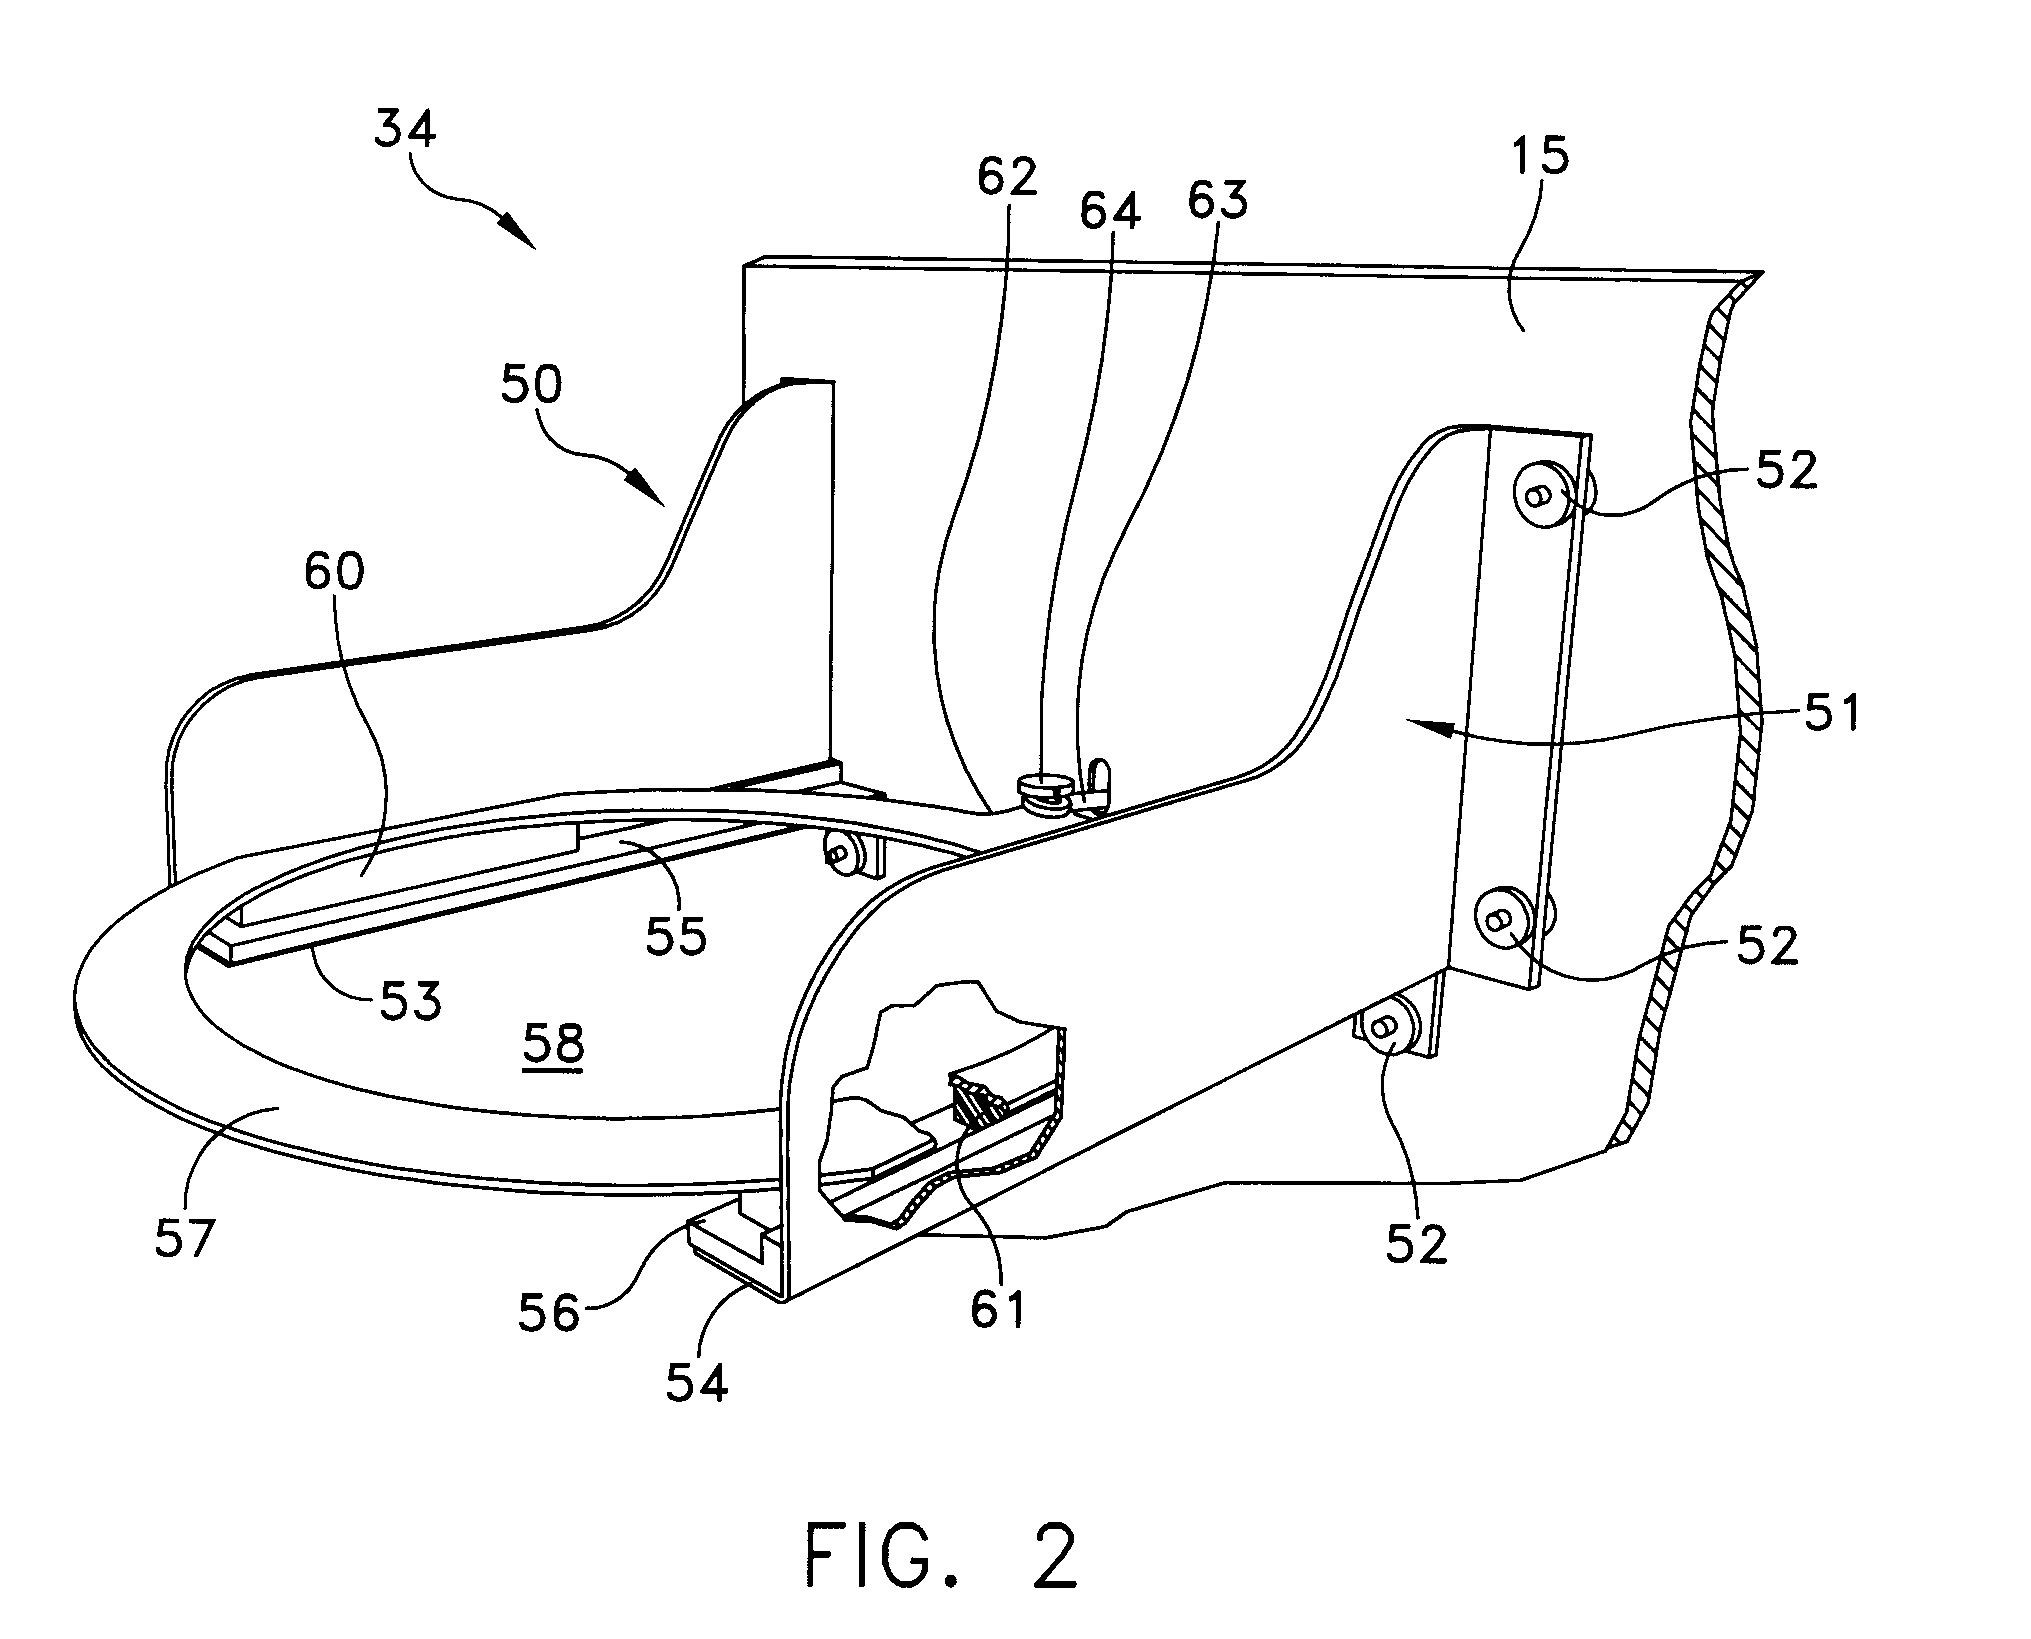 Apparatus for coating an item with a dry particulate material